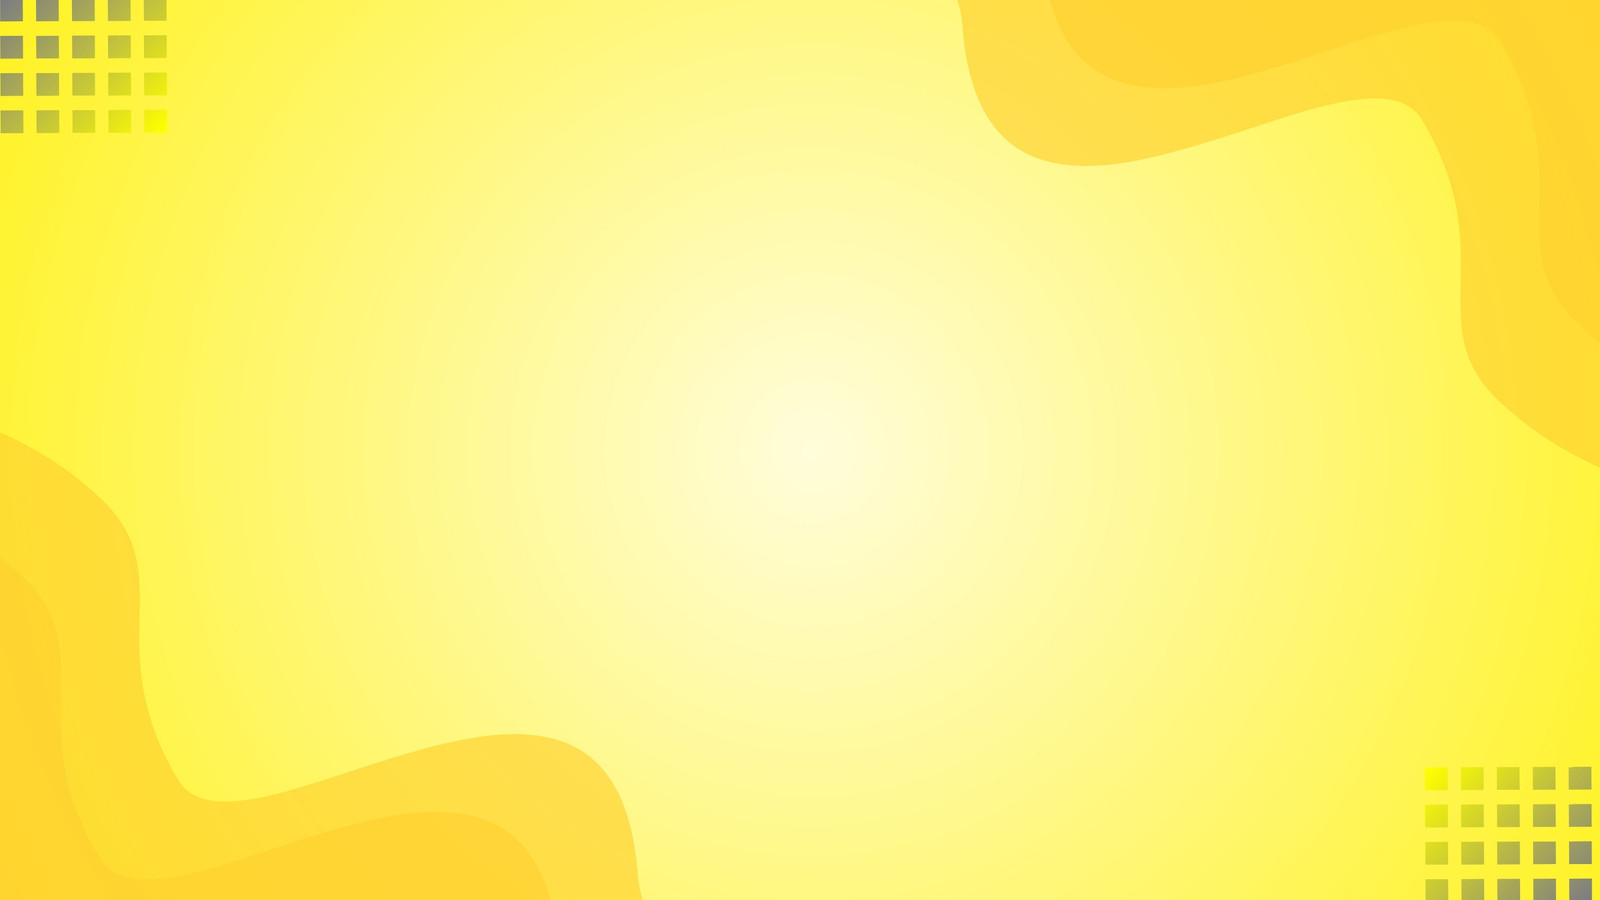 Free and customizable yellow templates